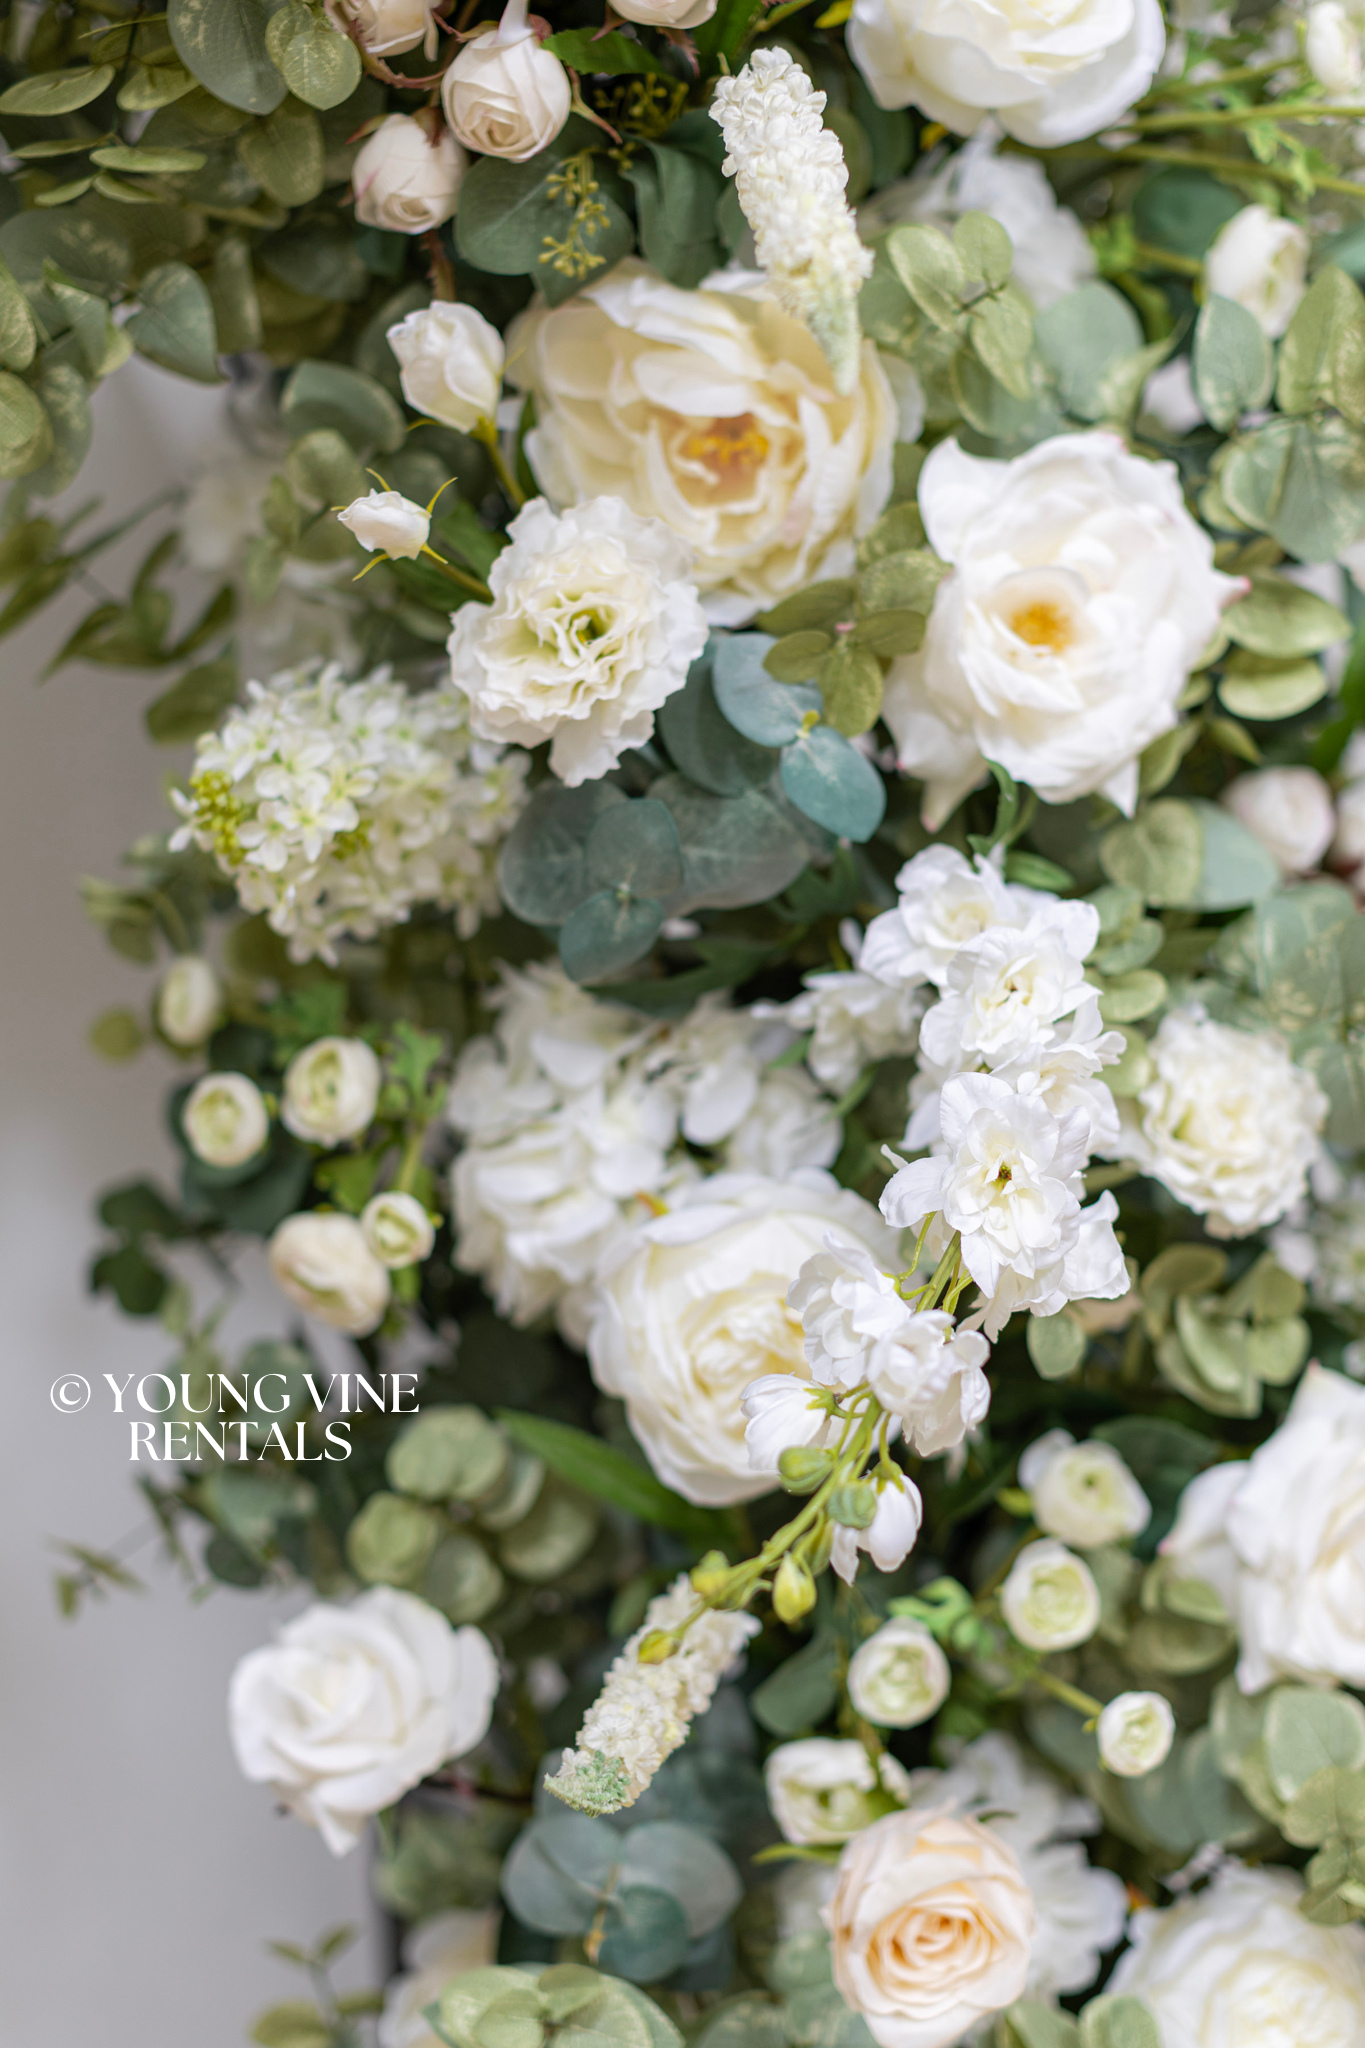 Close-up detail shot of lush, romantic wedding floral arbor studded with an abundance of ivory and white flowers and various types of eucalyptus foliage, styled on a black filigree arch frame.